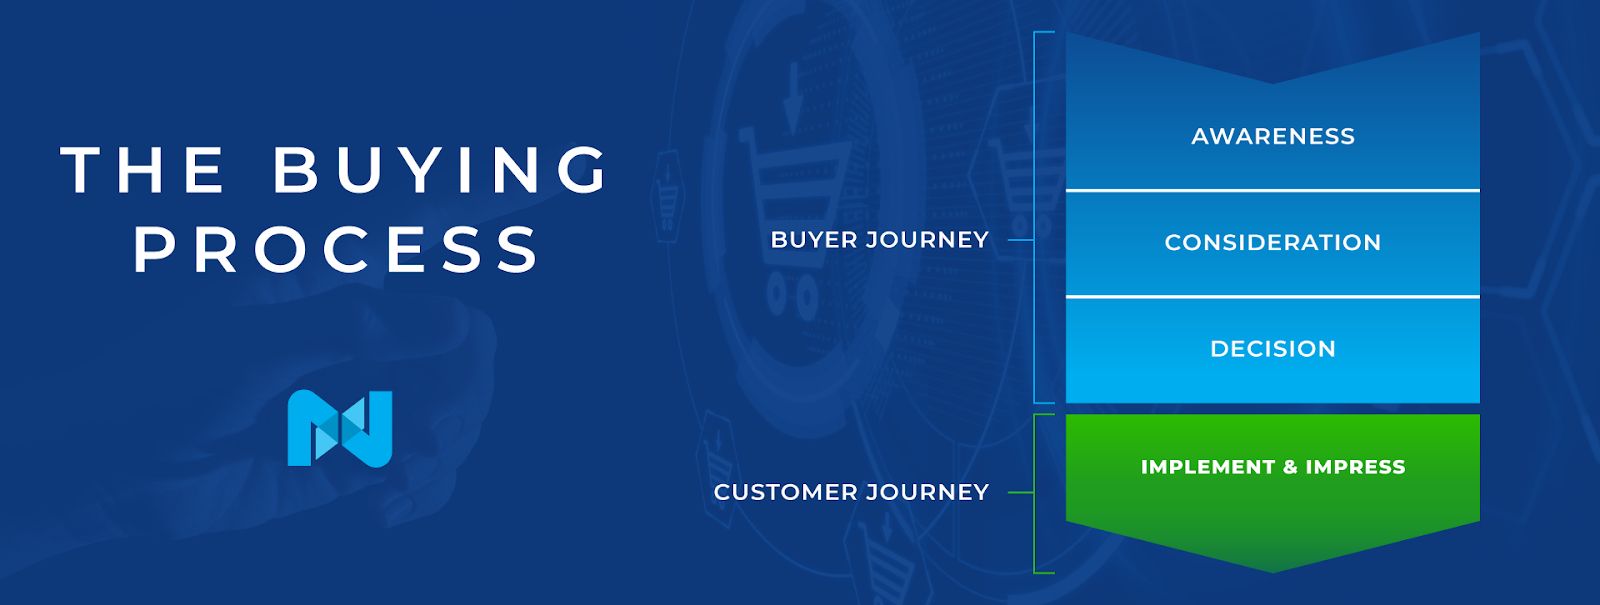 The buying process in ecommerce